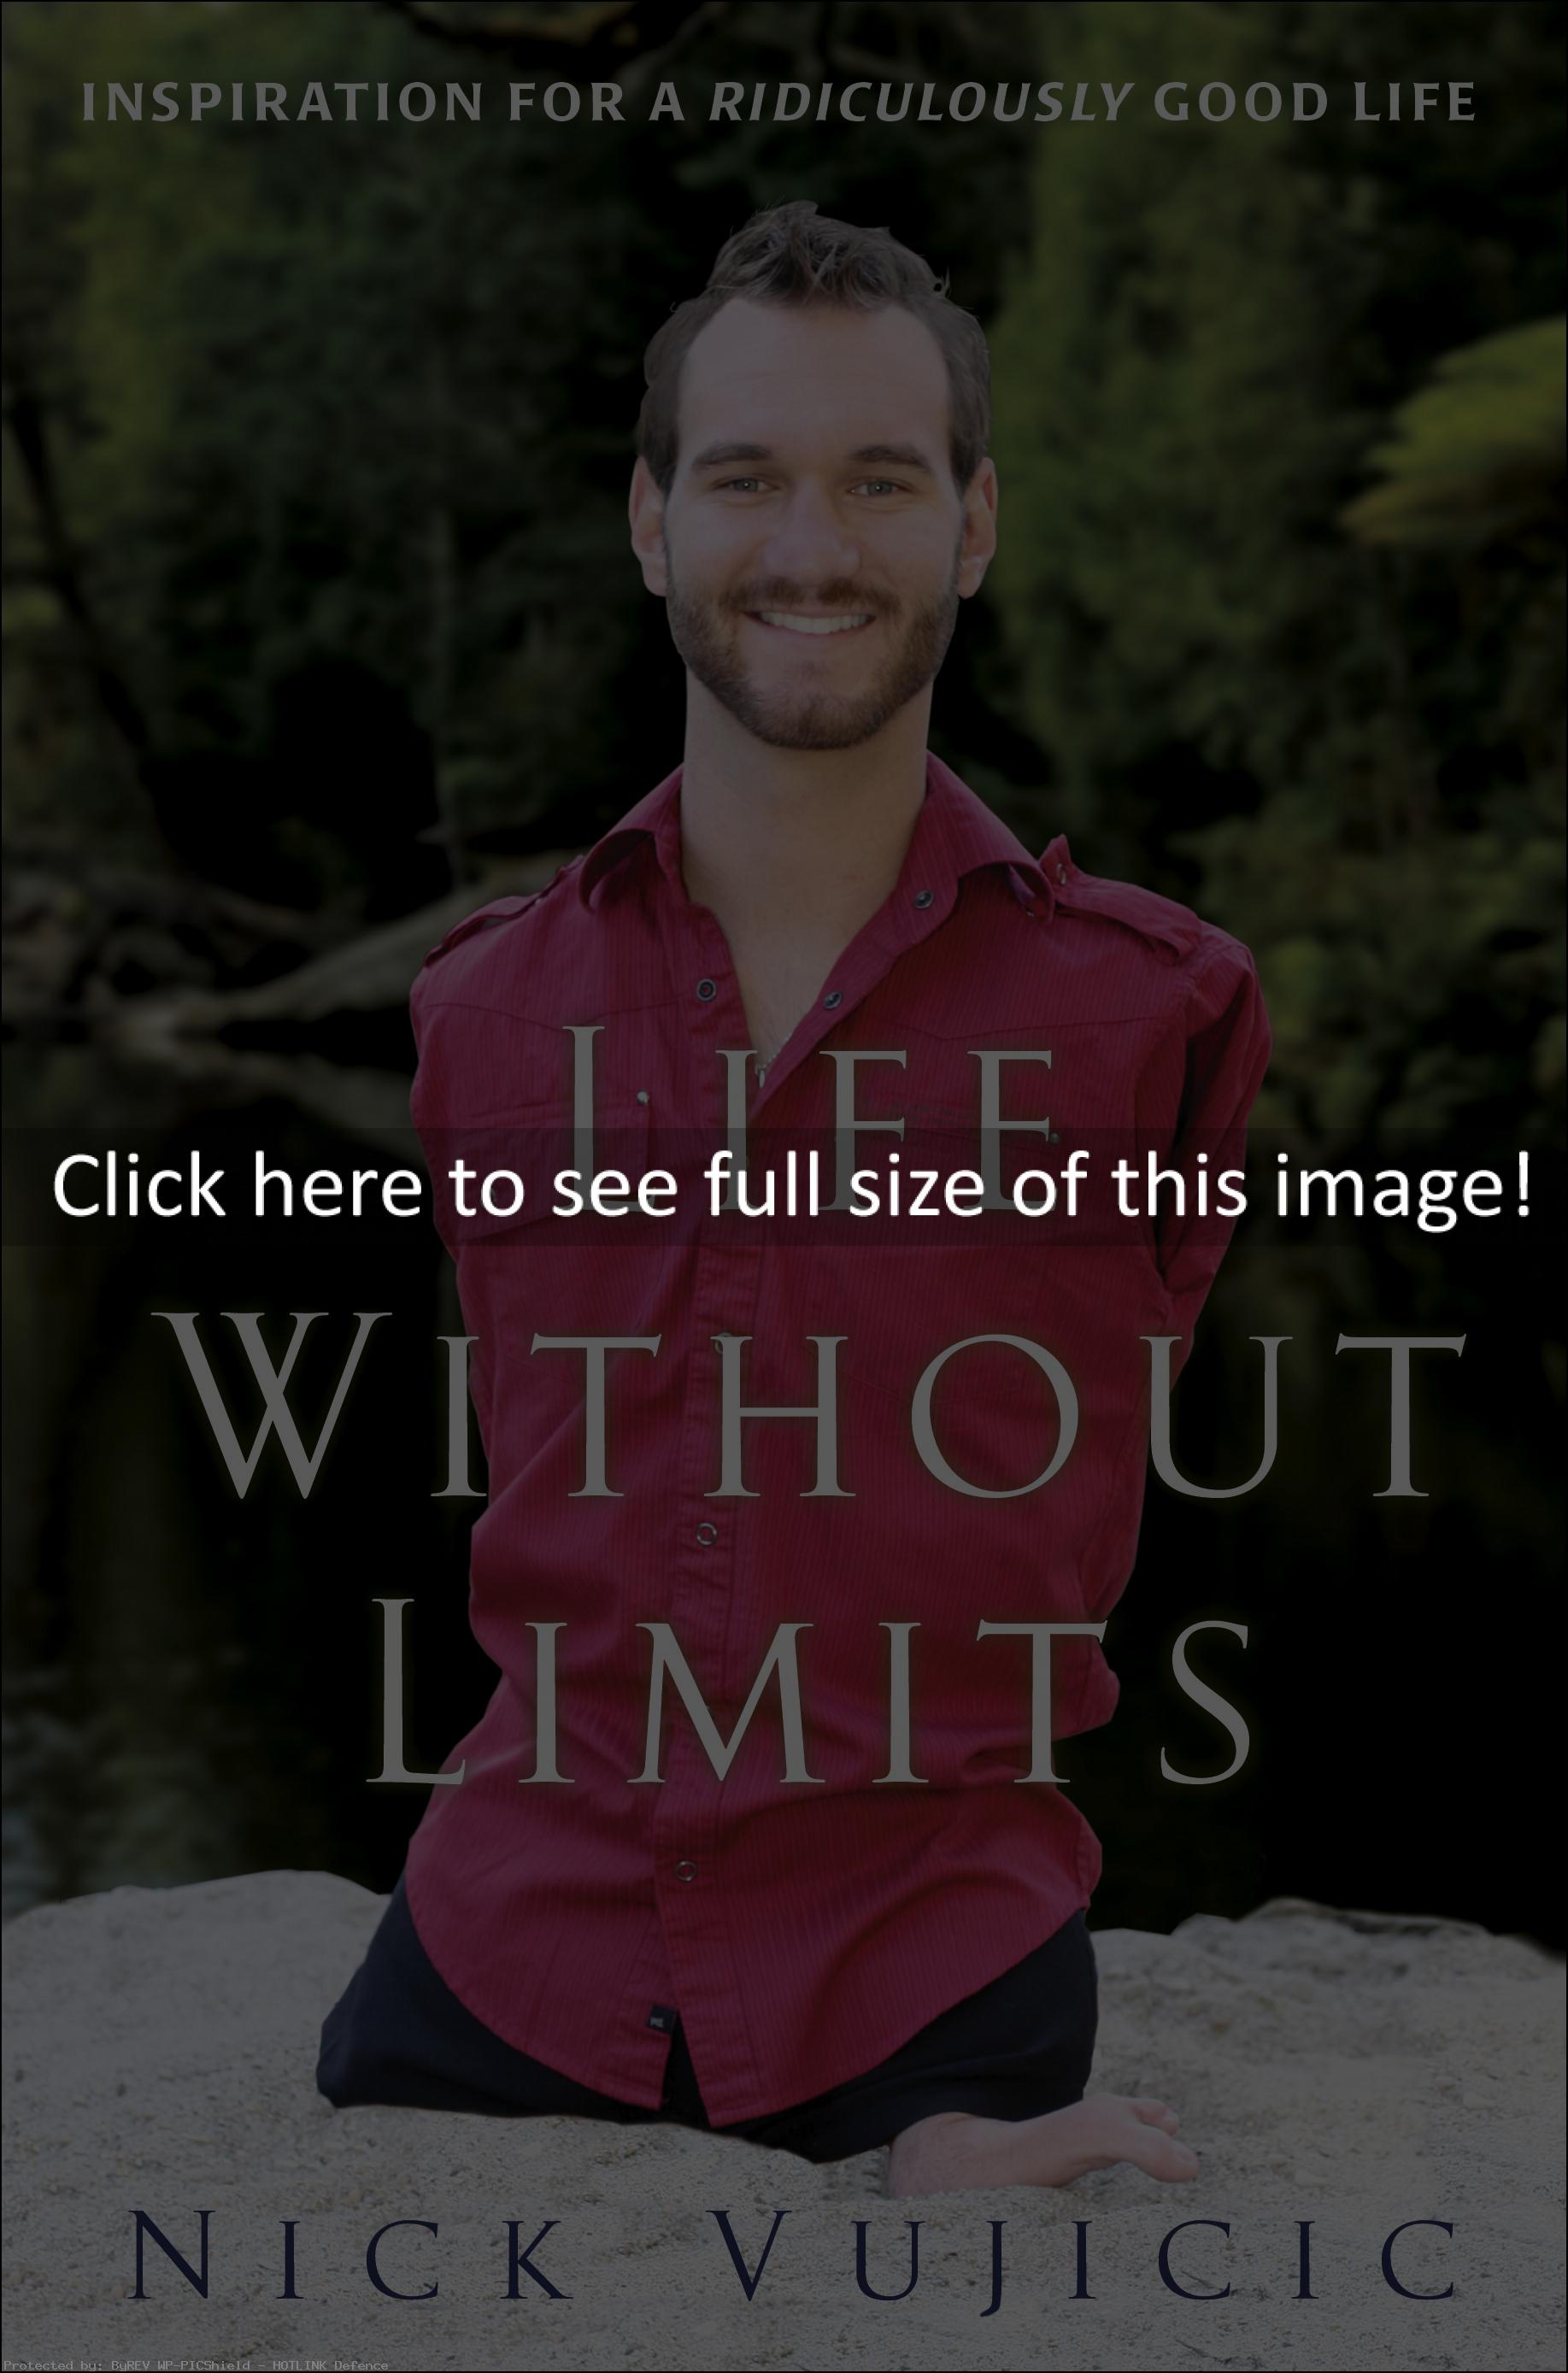 Quotes From Nick Vujicic